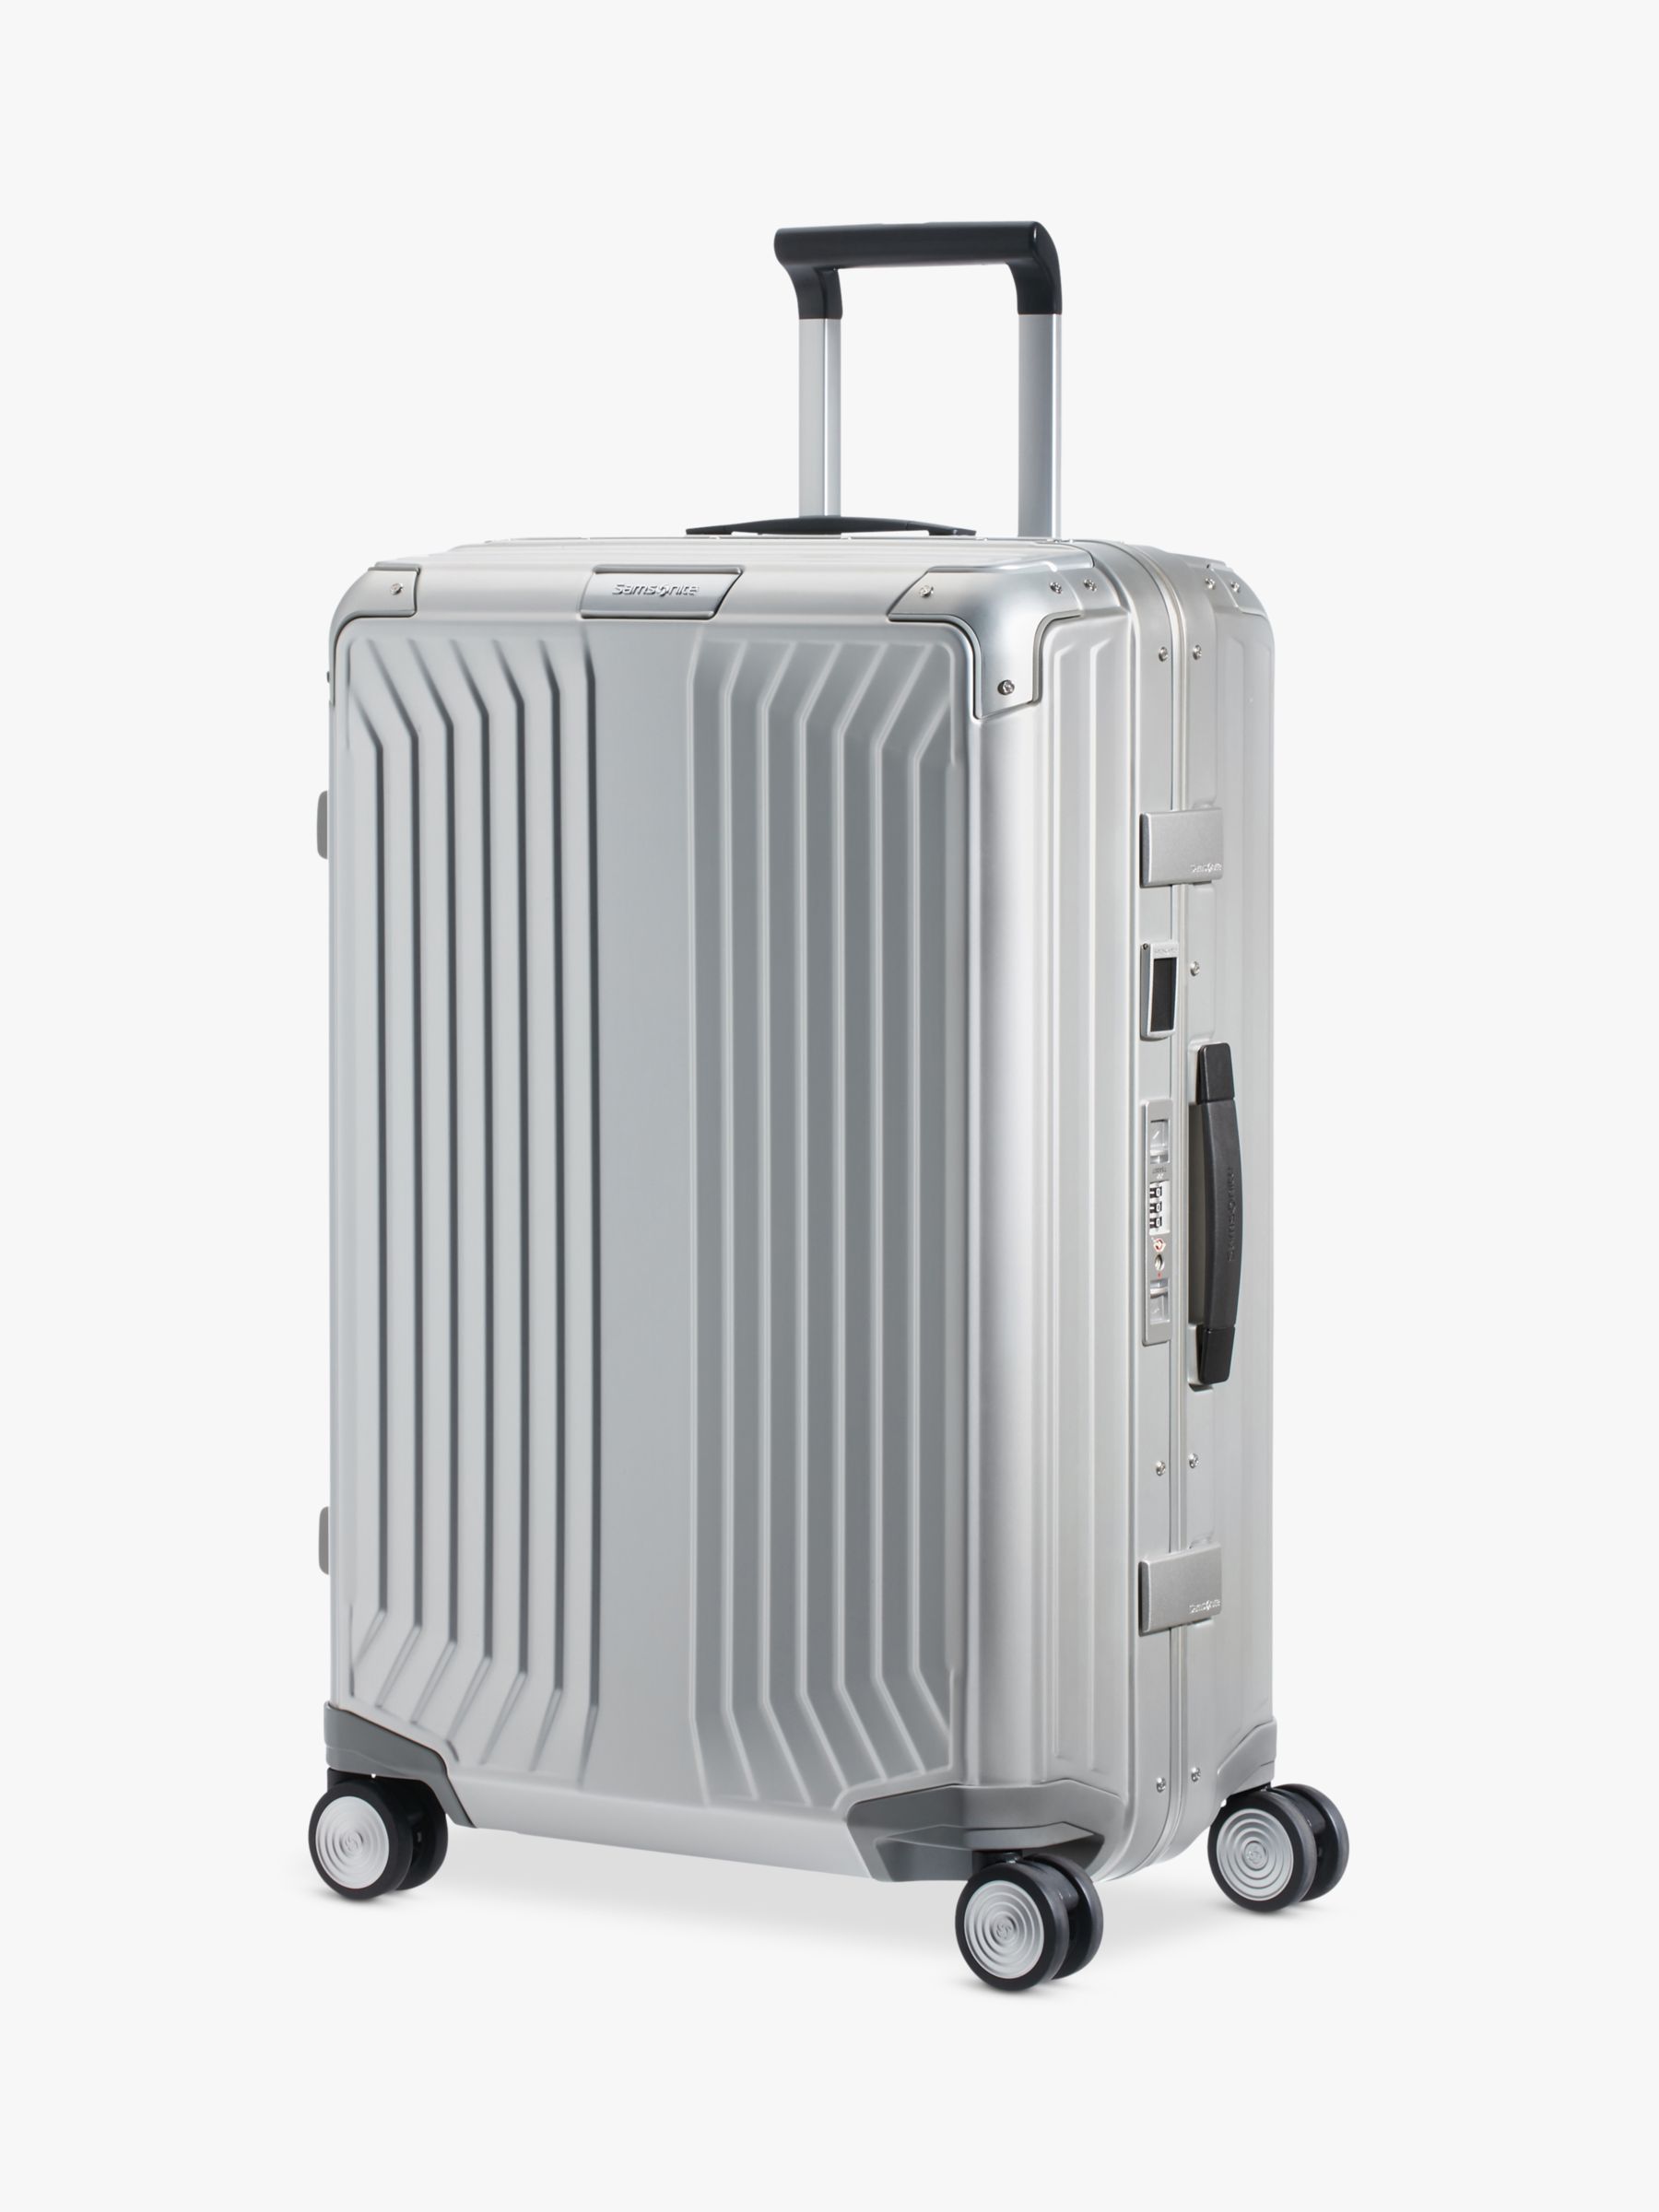 Is Samsonite the Same Company as American Tourister? - Luggage Unpacked